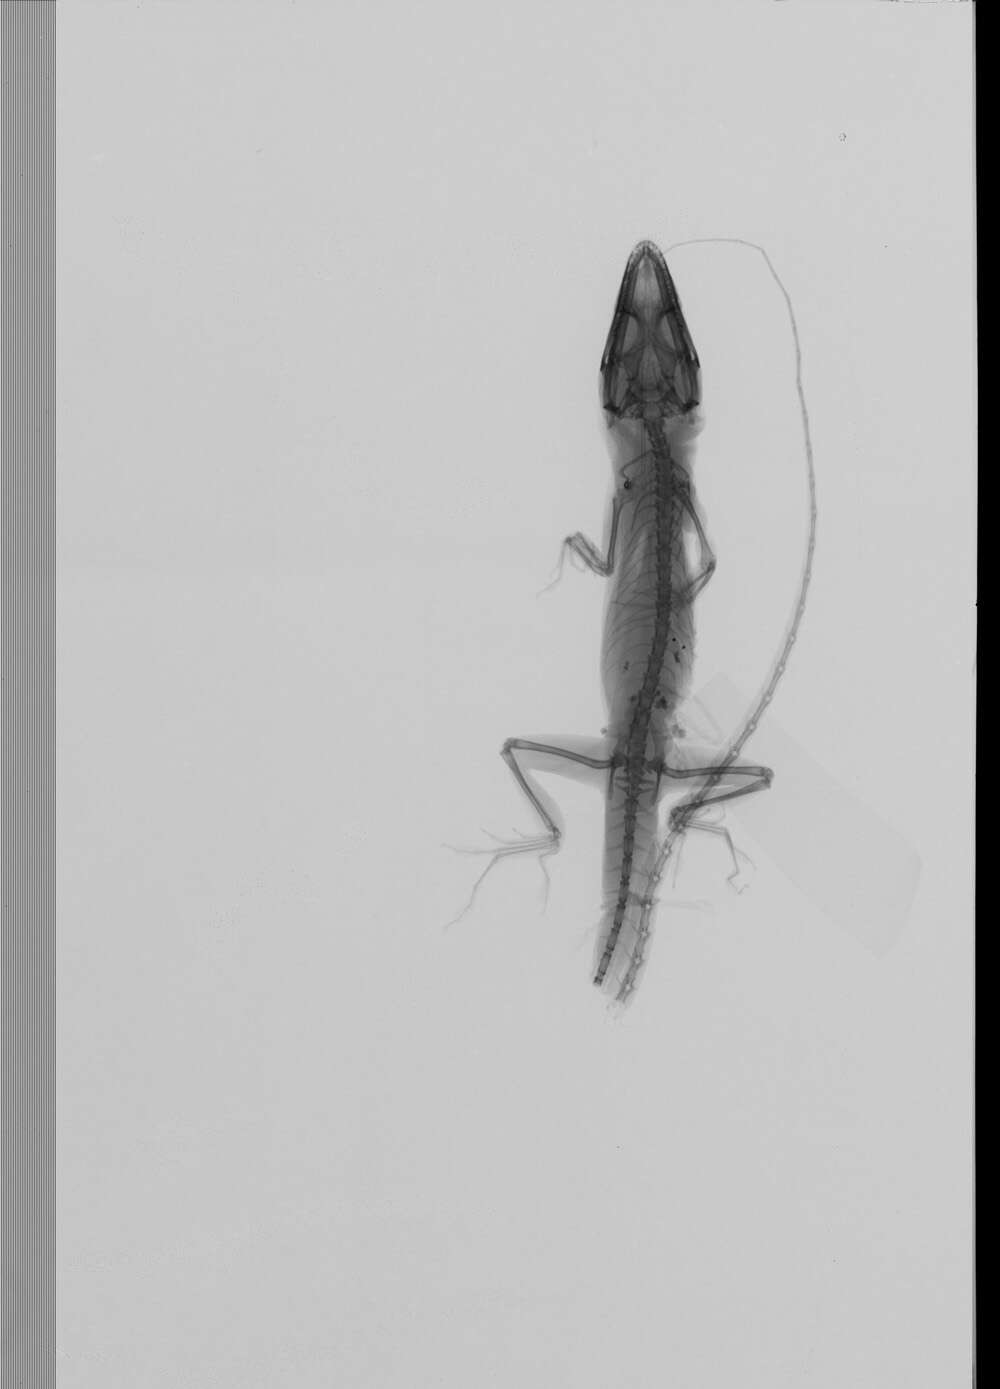 Image of American Anole